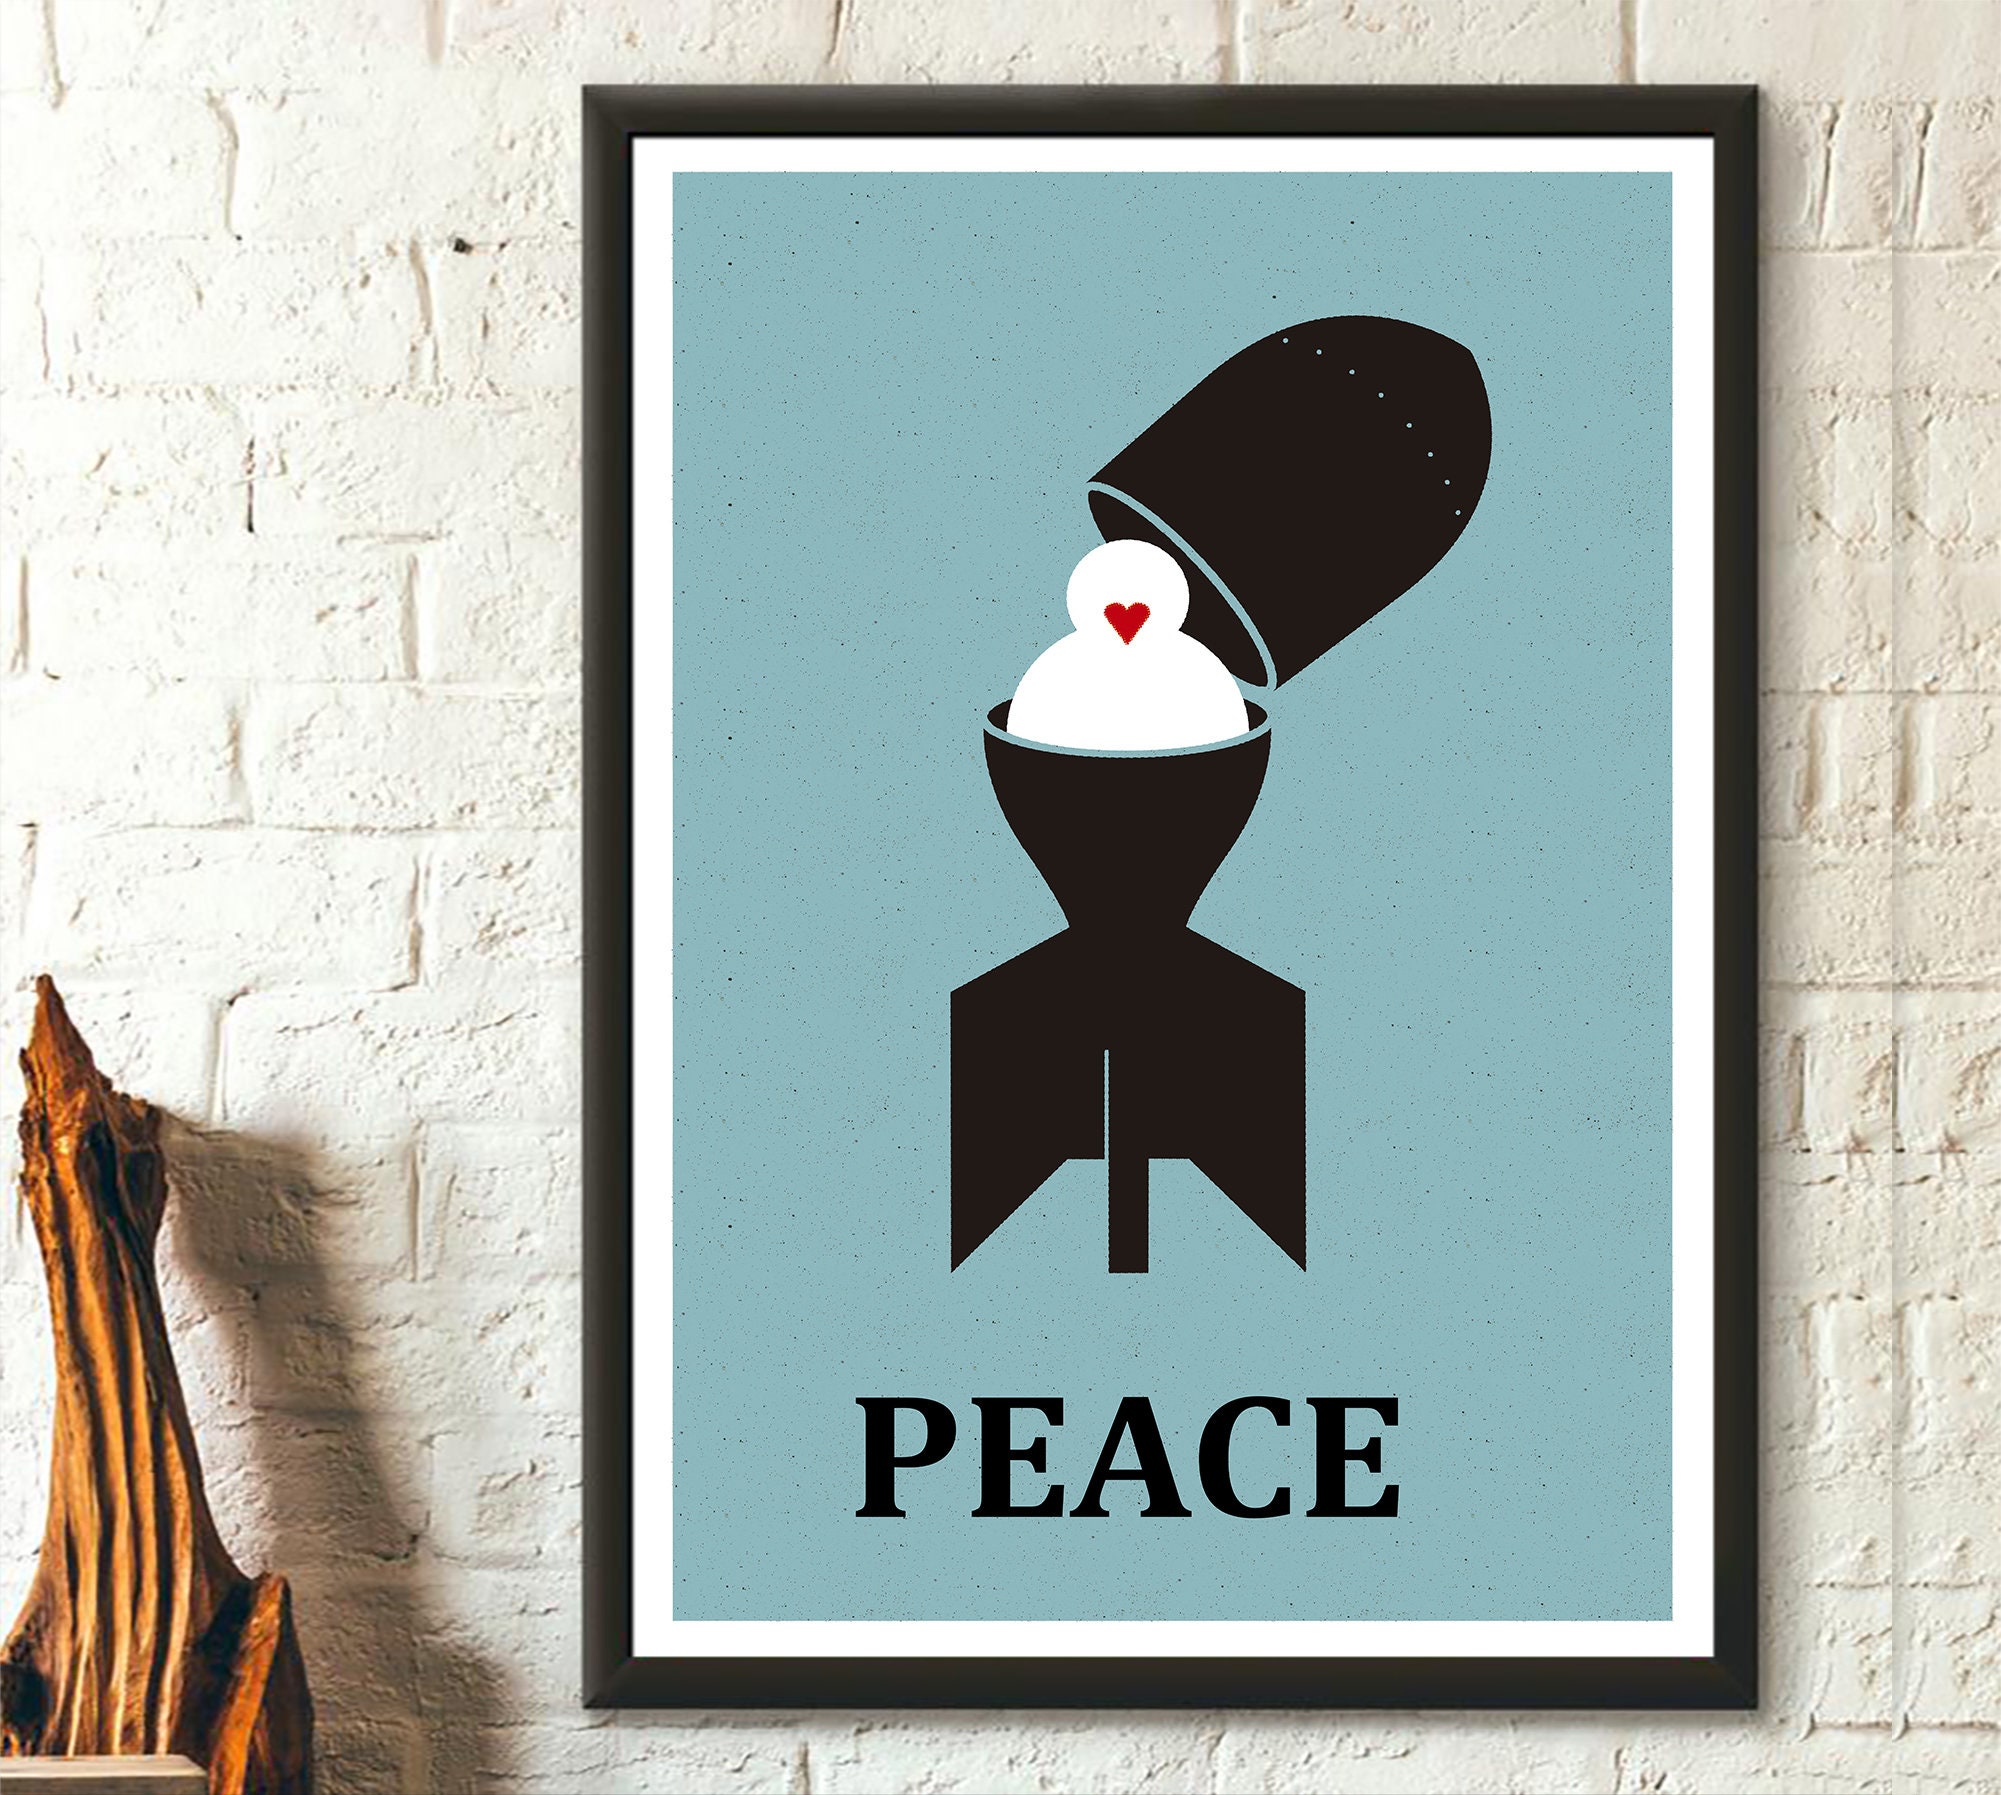 Peace - Wall Wall Idea Love Peace Art Poster Gift Etsy and Peace Art Poster Print